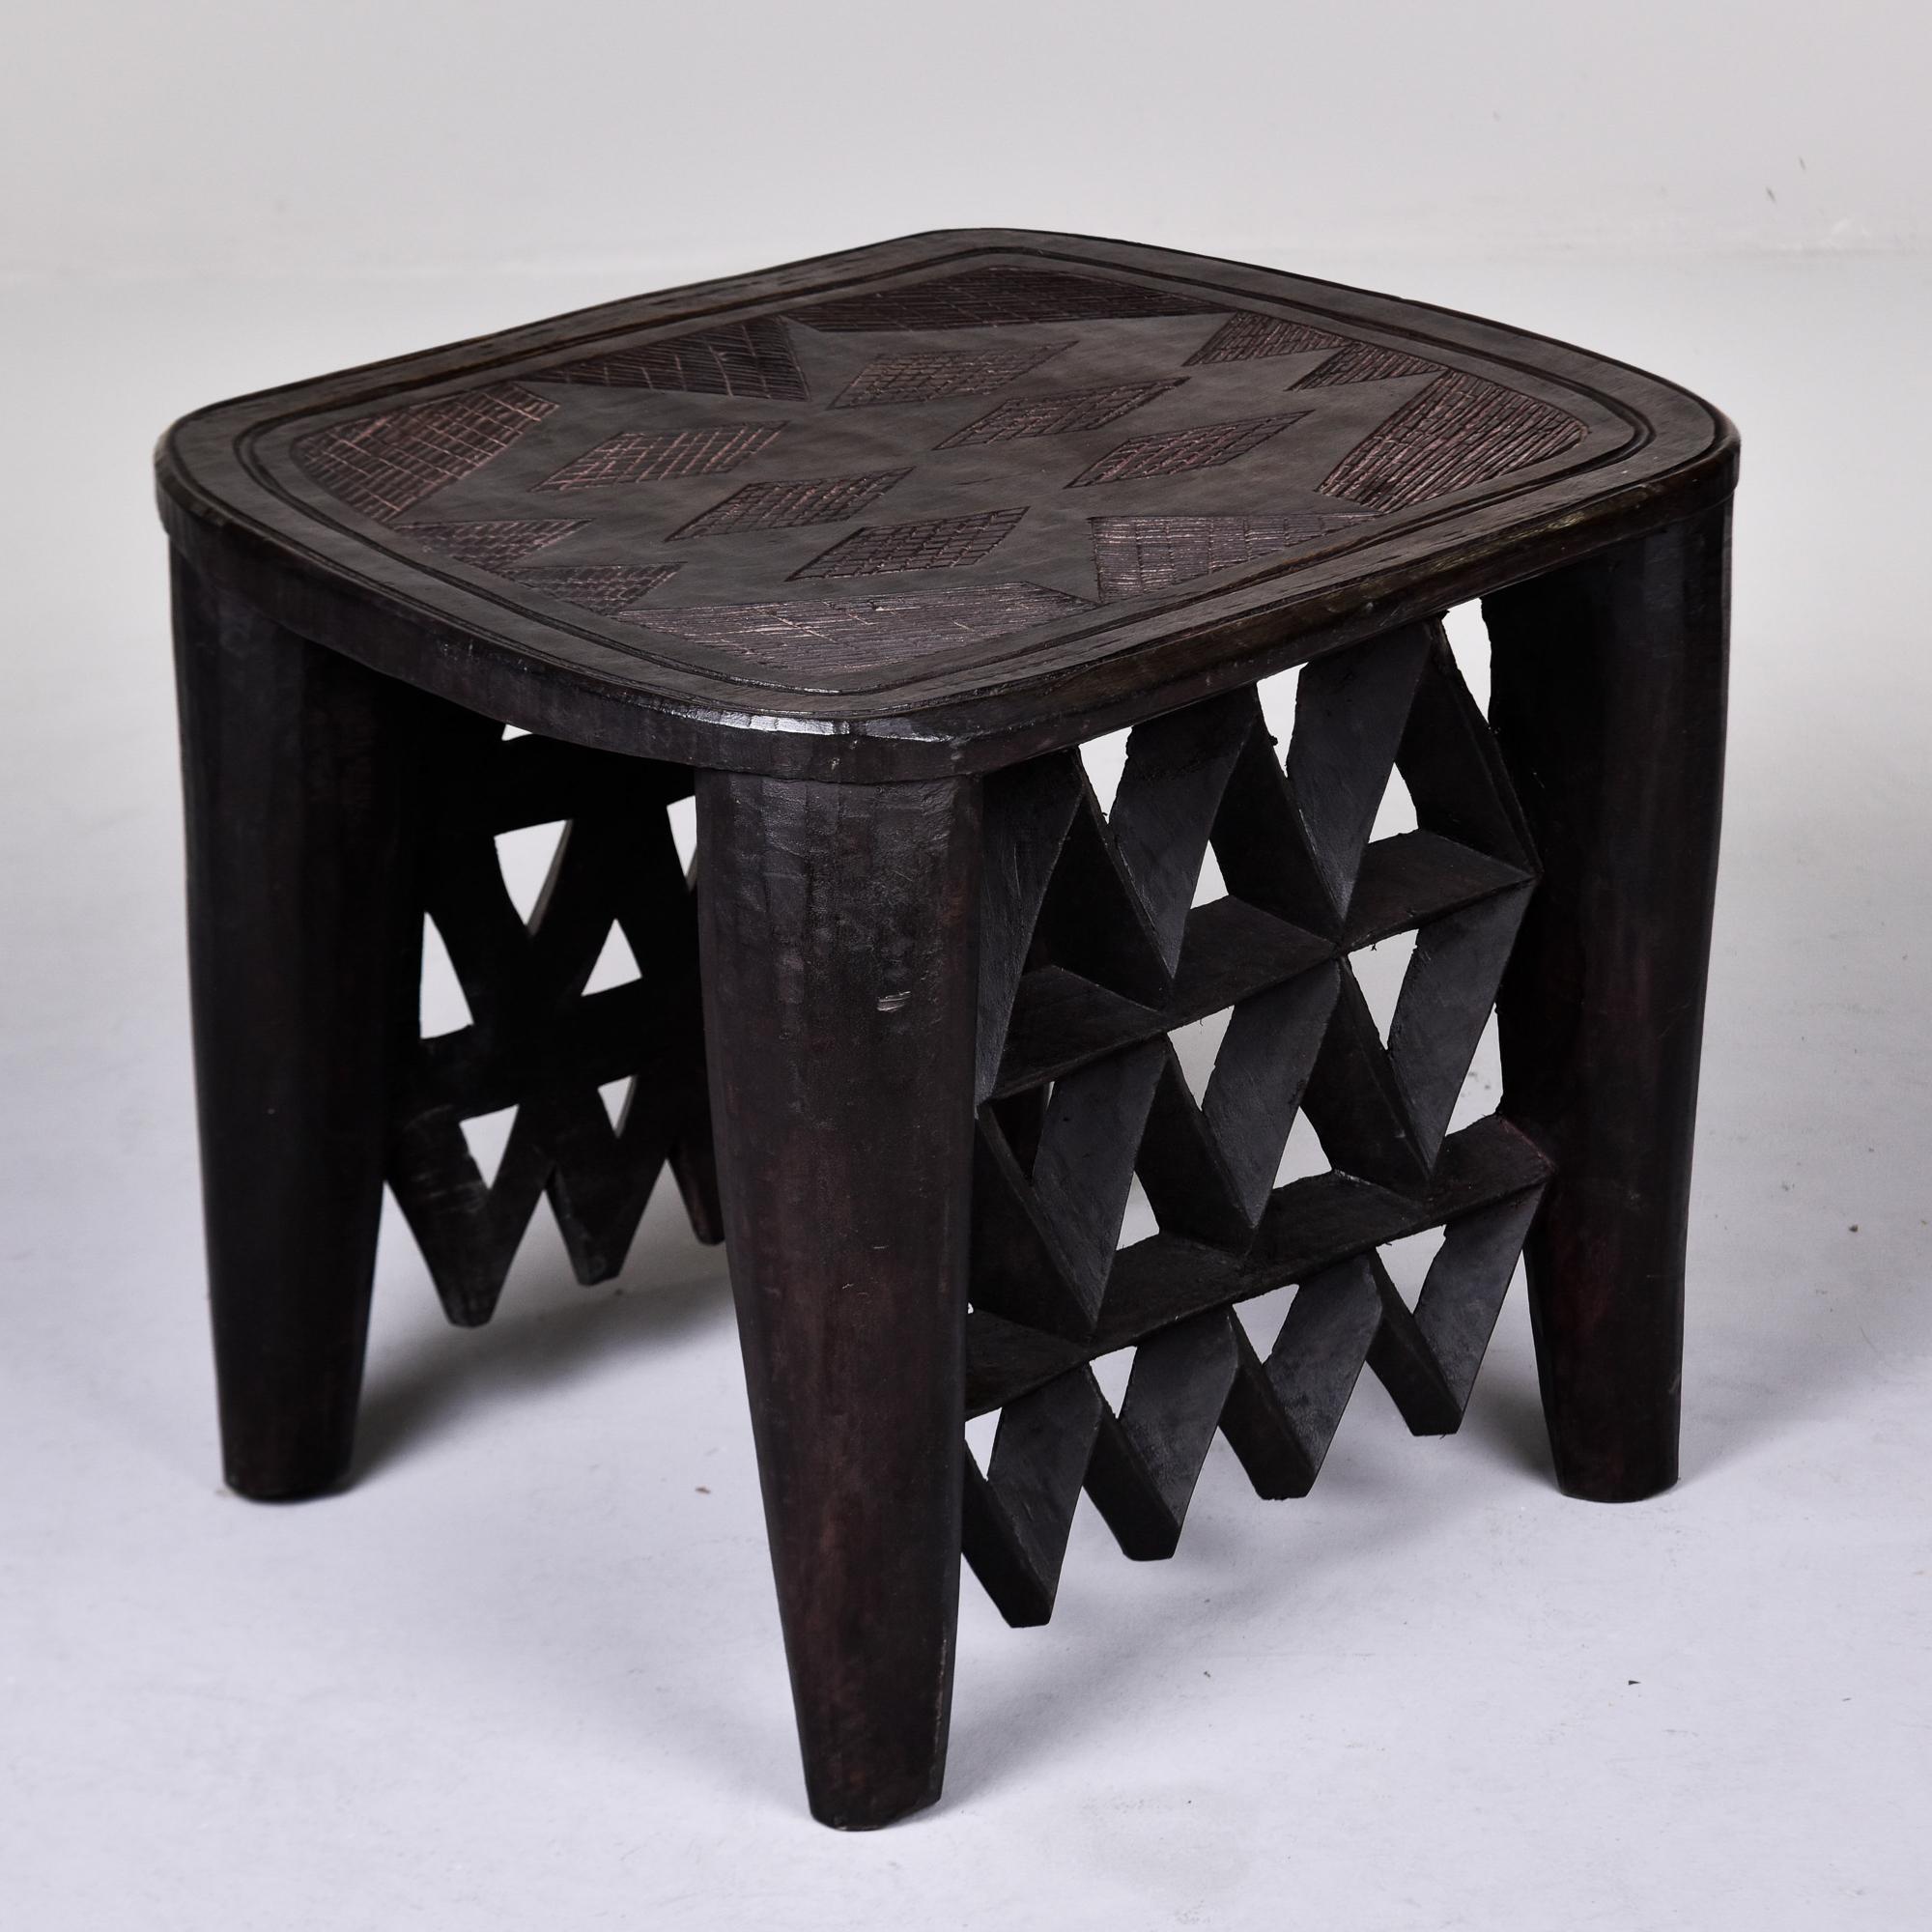 Circa 1960s hand carved side table by the Nupe people of Nigeria. Dark, dense wood has been hand carved from one solid piece. Four thick rounded and tapered legs with open lattice work sides. Carved designs on table top. Overall very good vintage